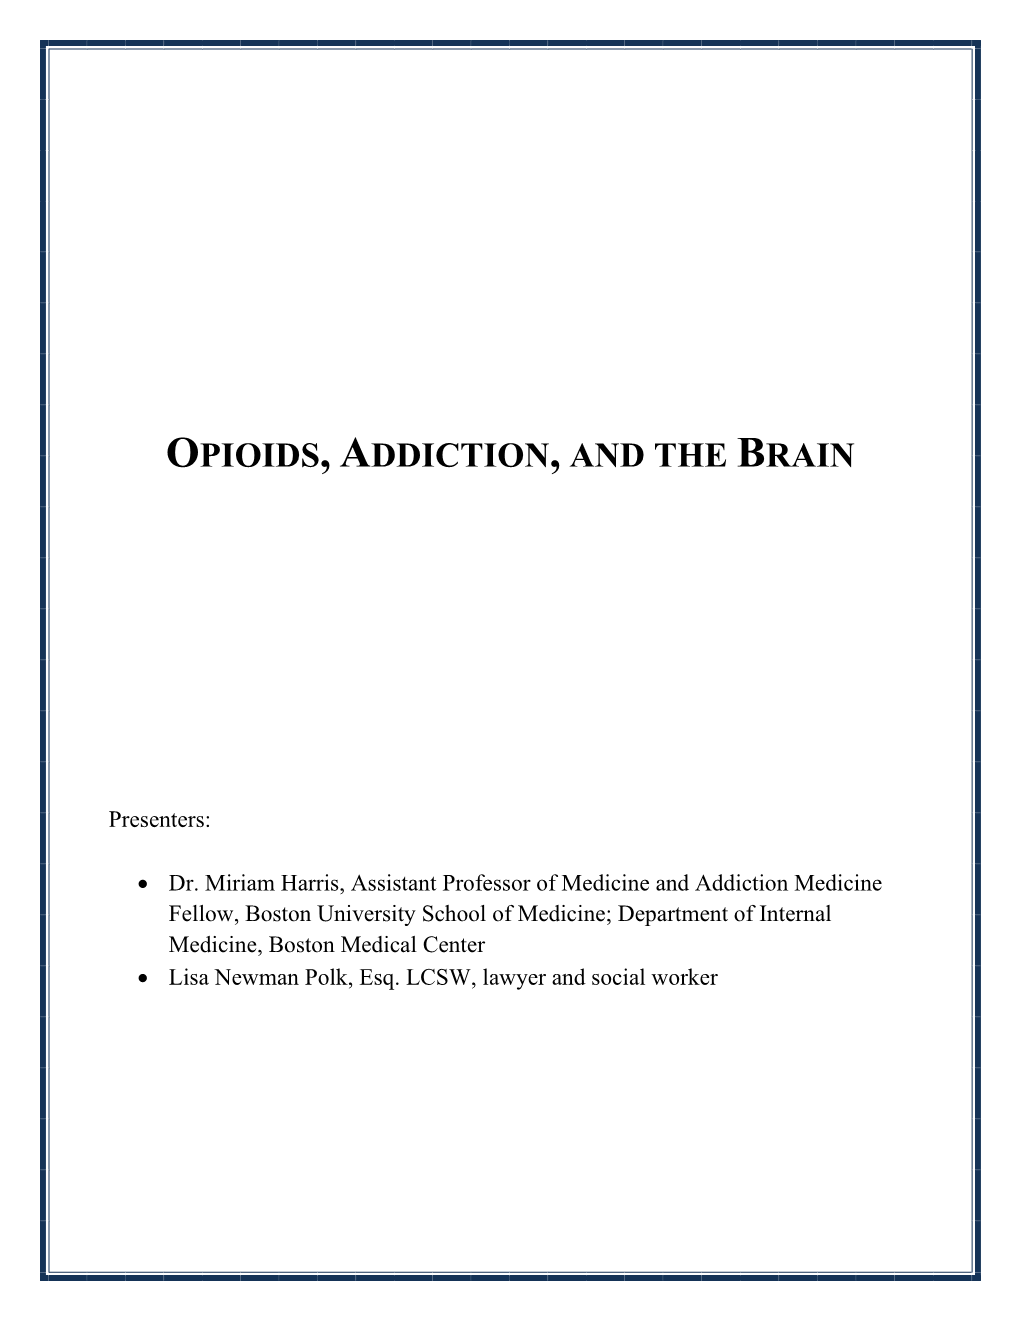 Opioids, Addiction, and the Brain